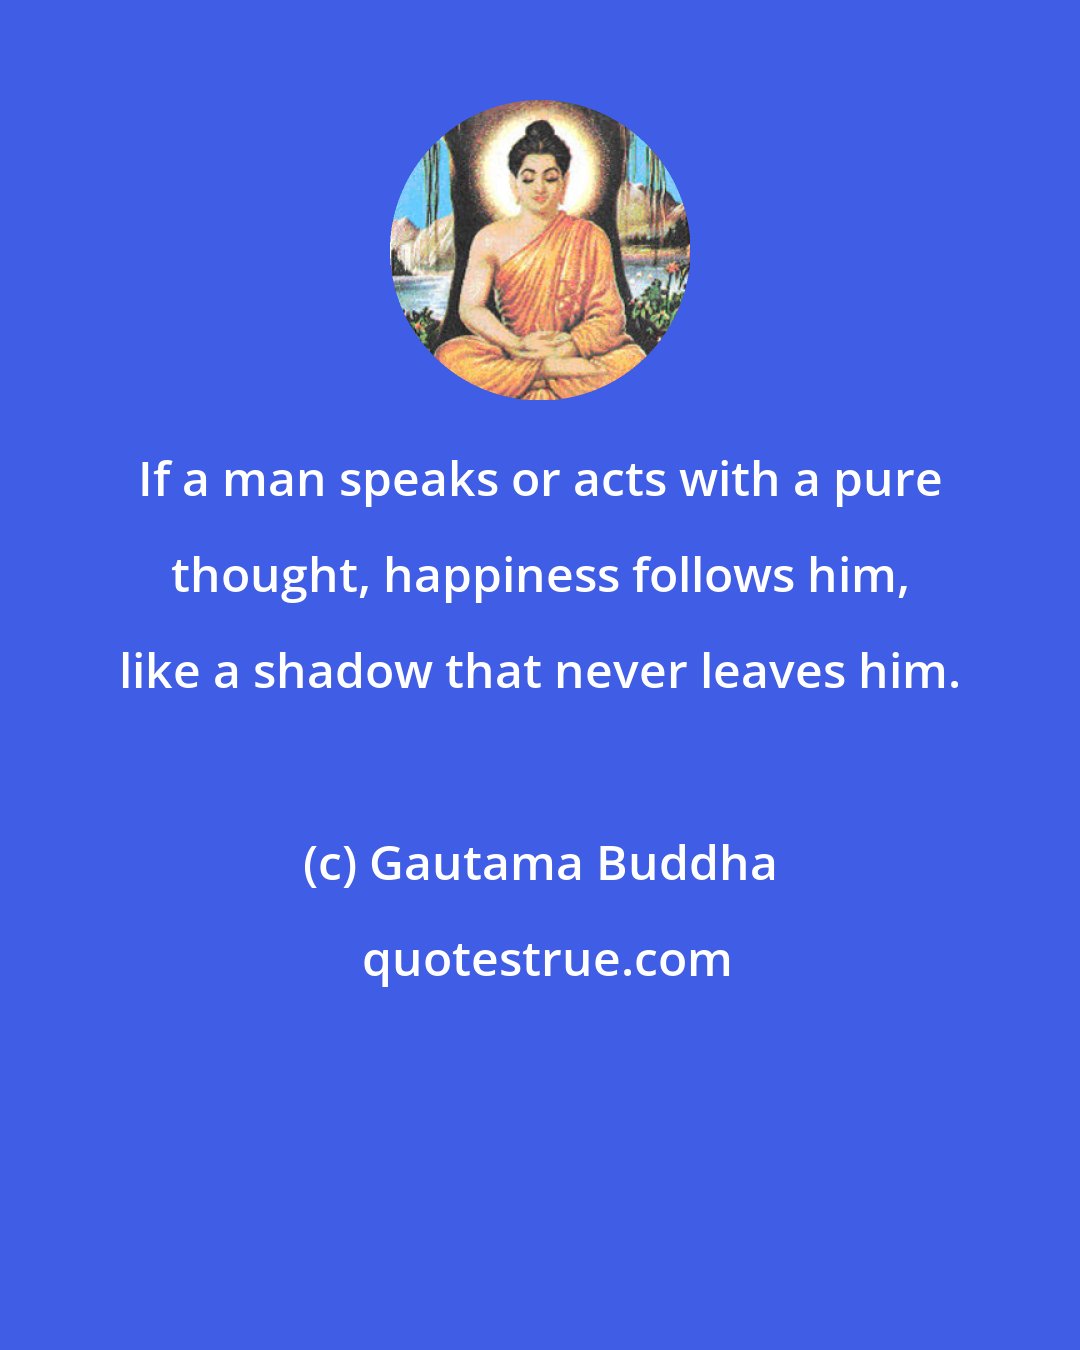 Gautama Buddha: If a man speaks or acts with a pure thought, happiness follows him, like a shadow that never leaves him.